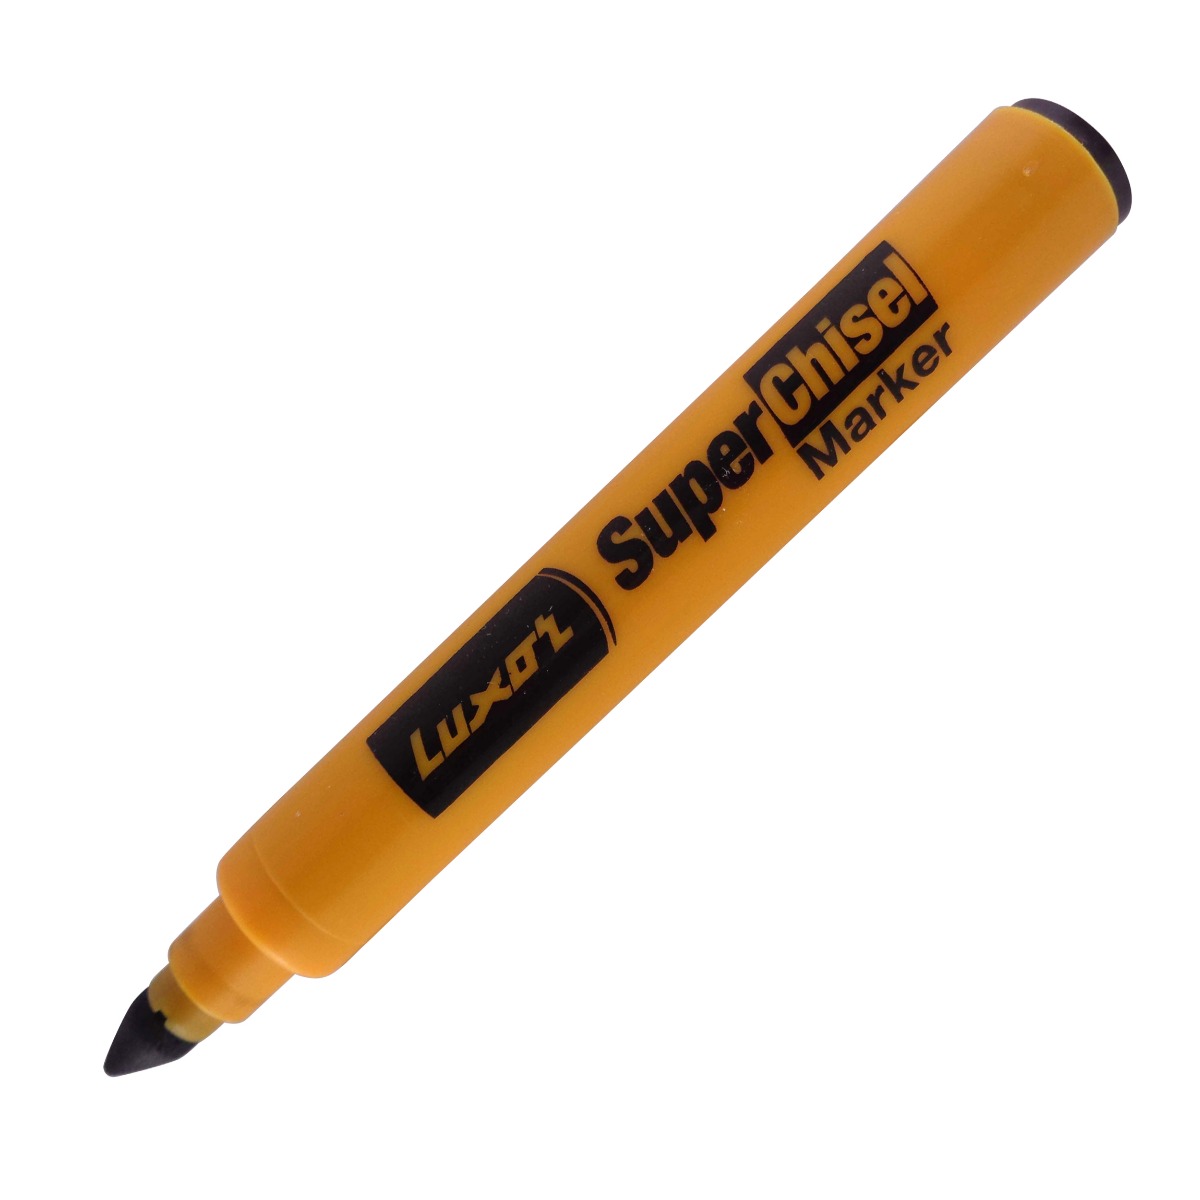 Luxor Model: 15092 Super chisel Yellow color body with Black color cap with black ink marker